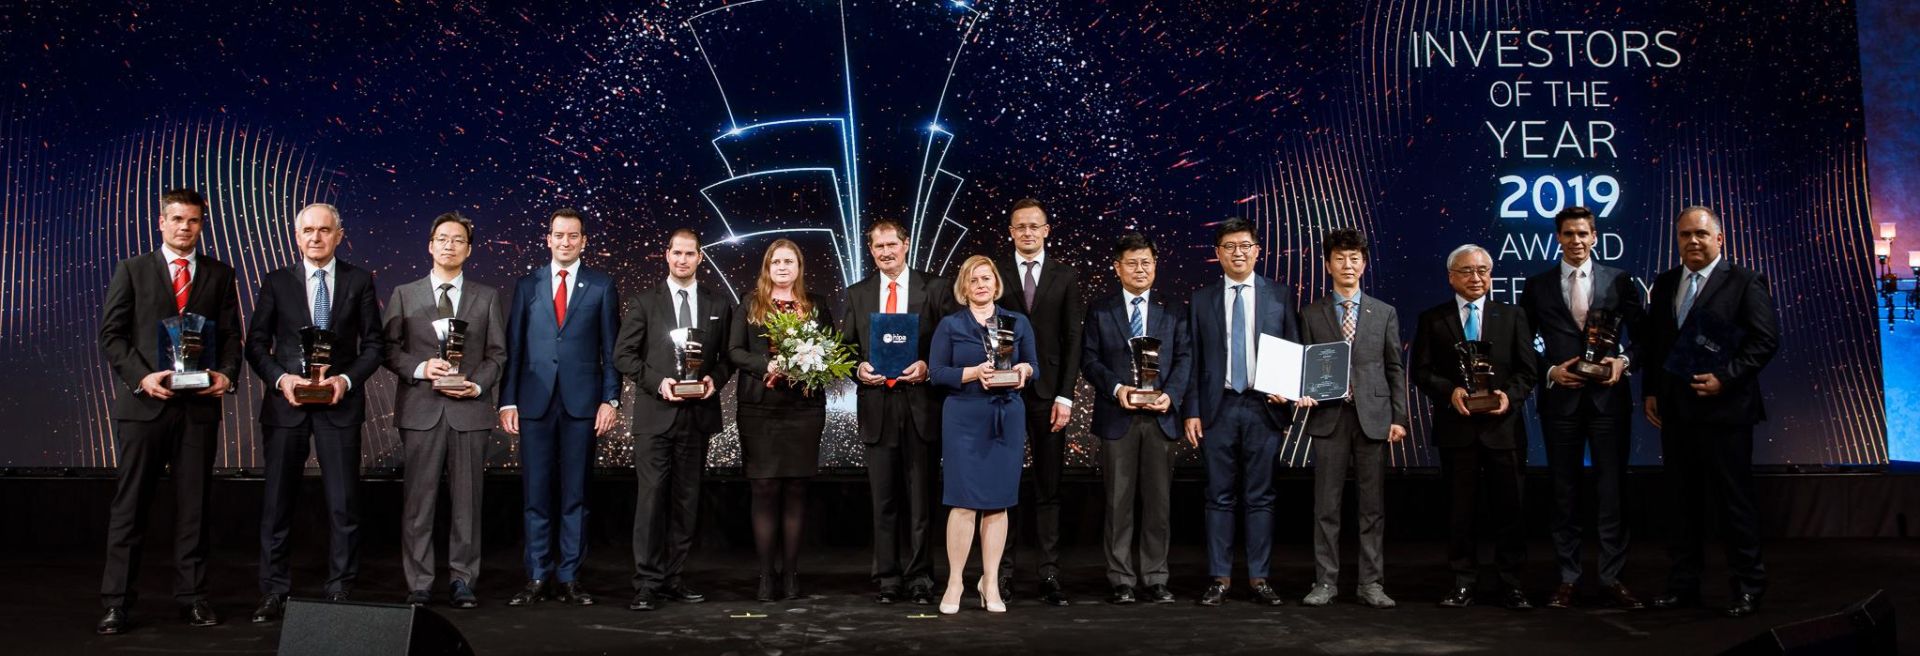 The most prominent investors of 2019 have been honoured in eight categories